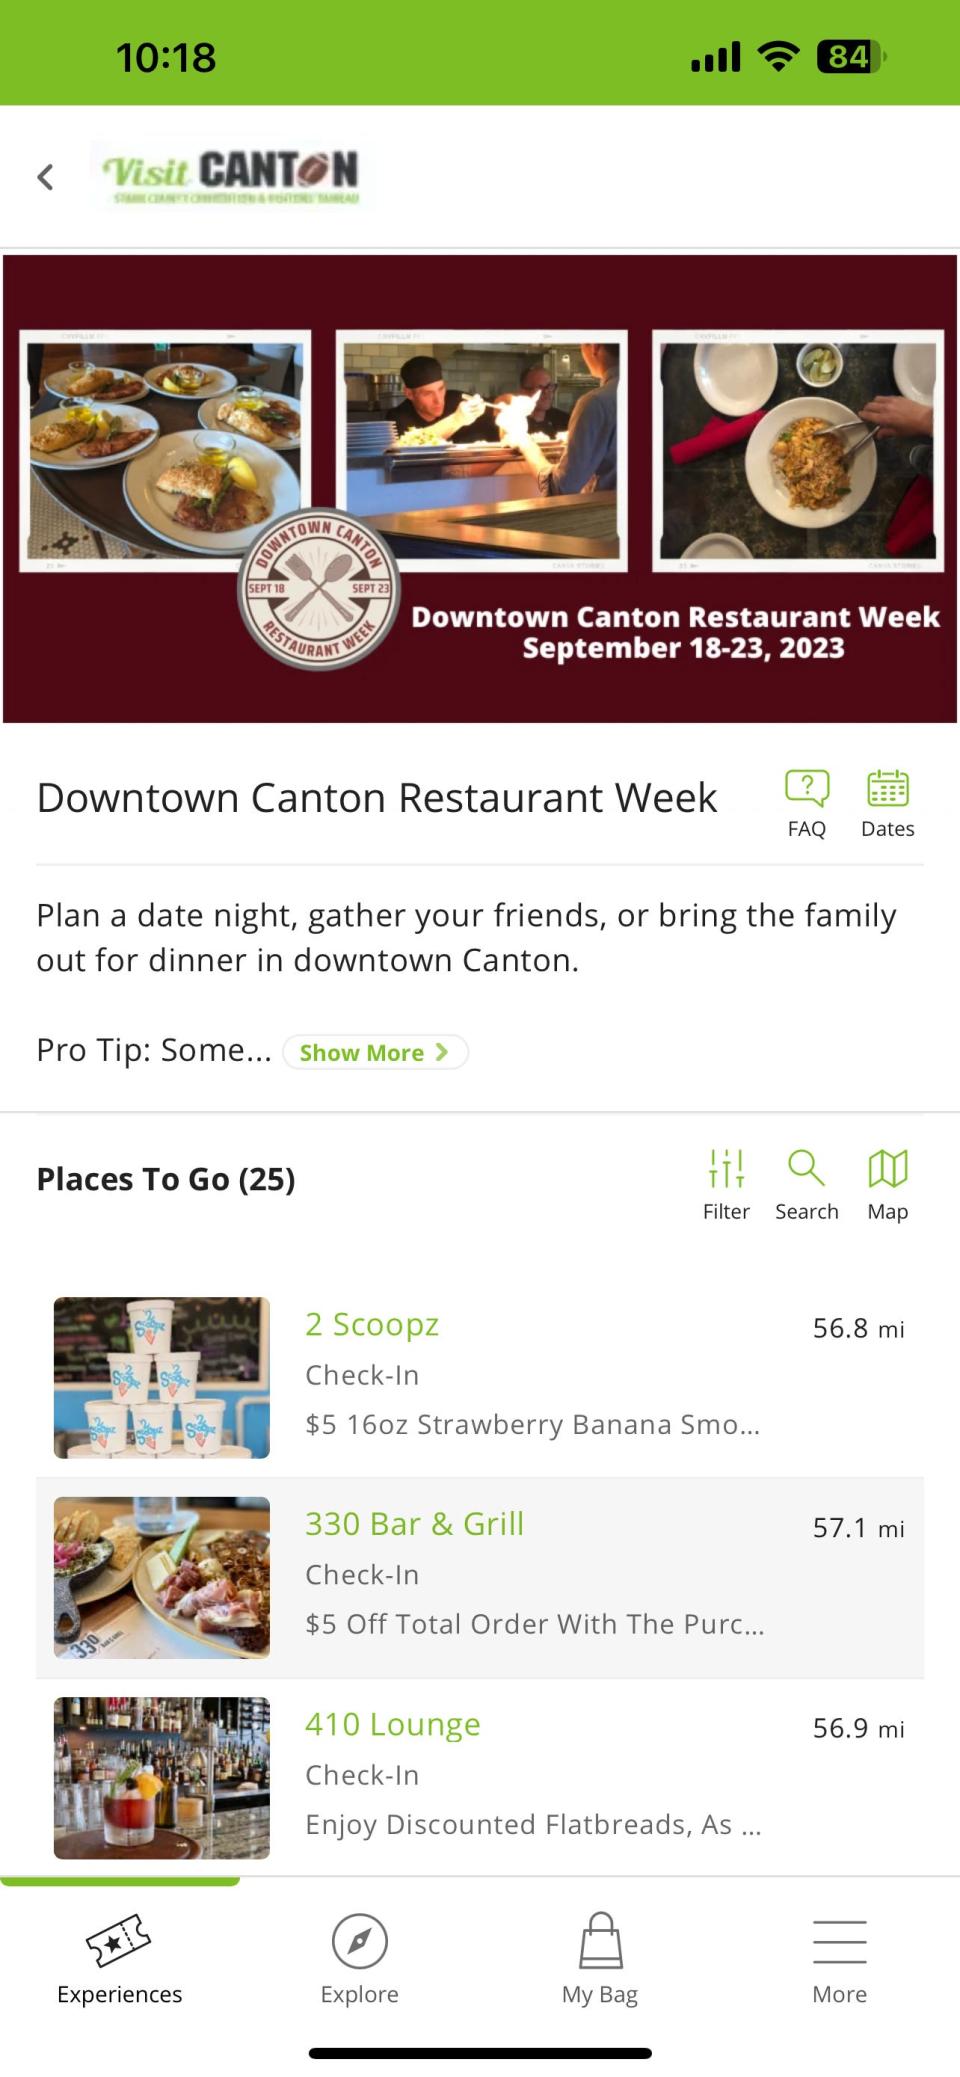 An app that lists the deals for the 2023 Downtown Canton Restaurant Week is available at cantoneats.com. The Visit Canton app is required to get the special discounts.